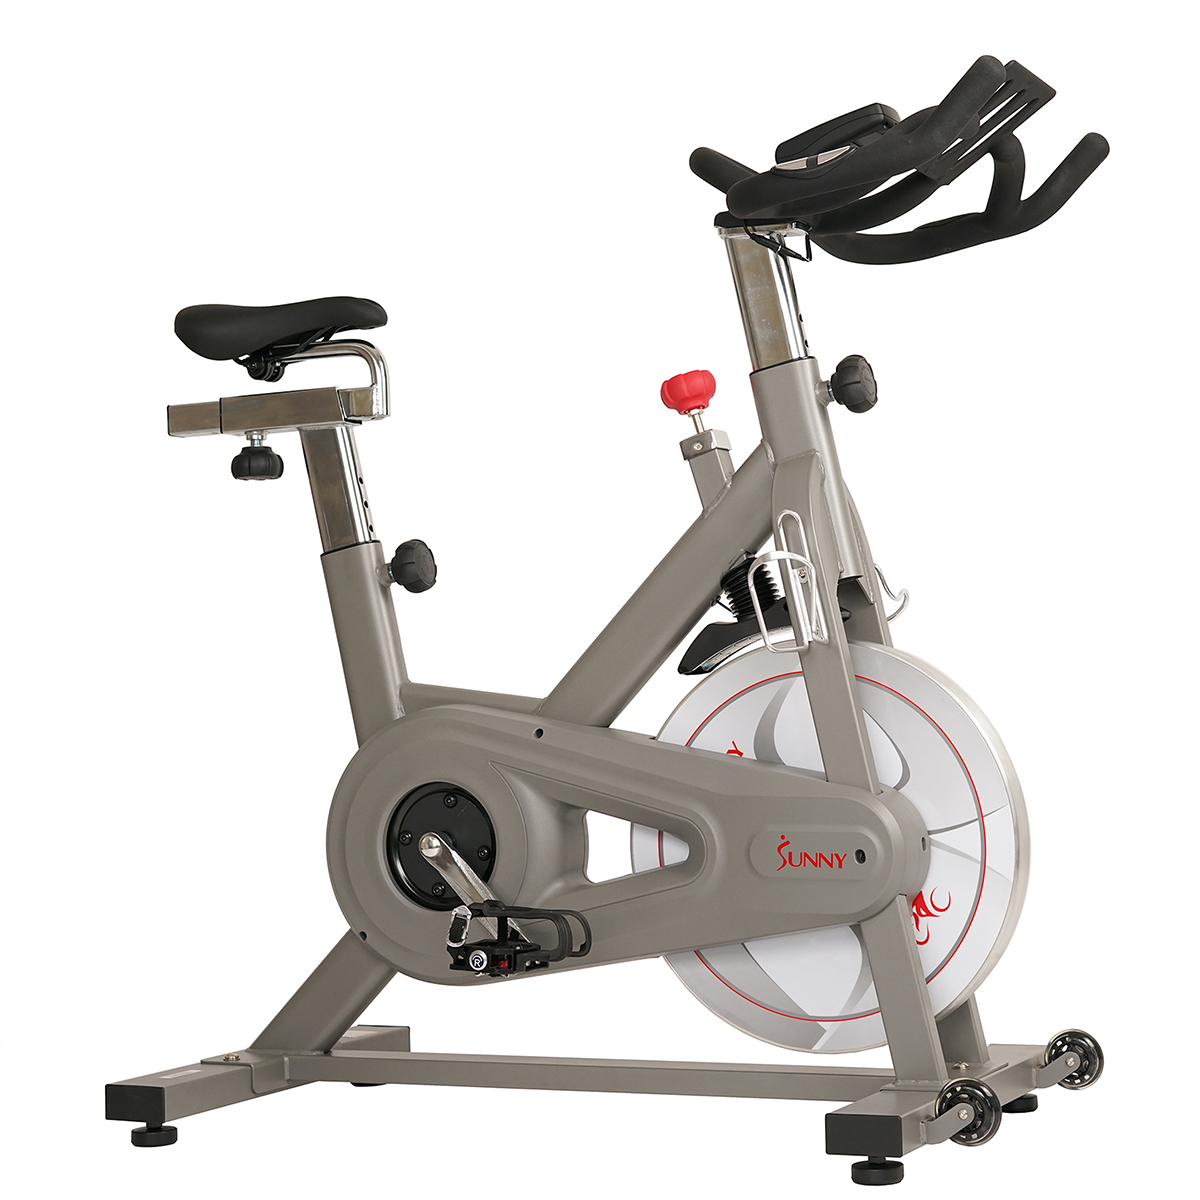 Sunny Health & Fitness Synergy Pro Magnetic Indoor Cycling Bike - SF-B1851 - image 4 of 13